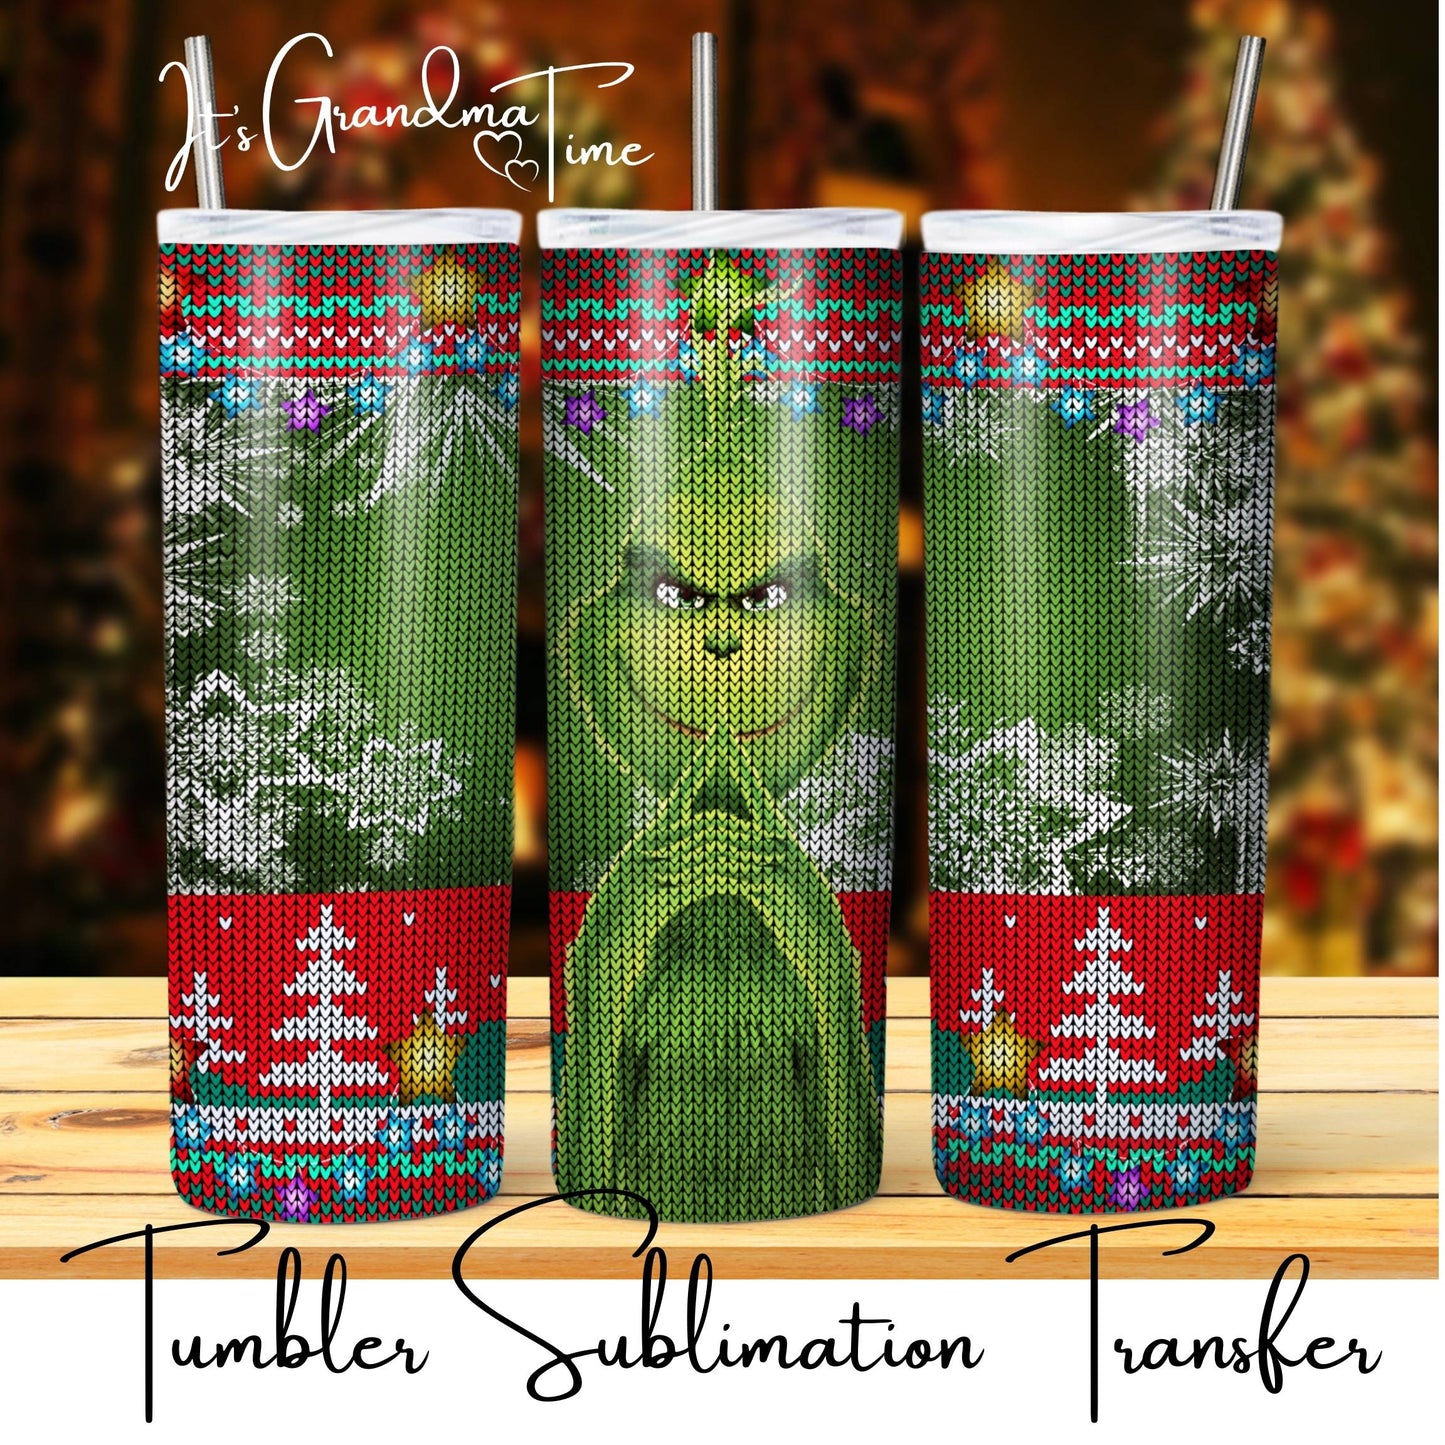 SUB2231 Christmas Sweater Grinch Tumbler Sublimation Transfer